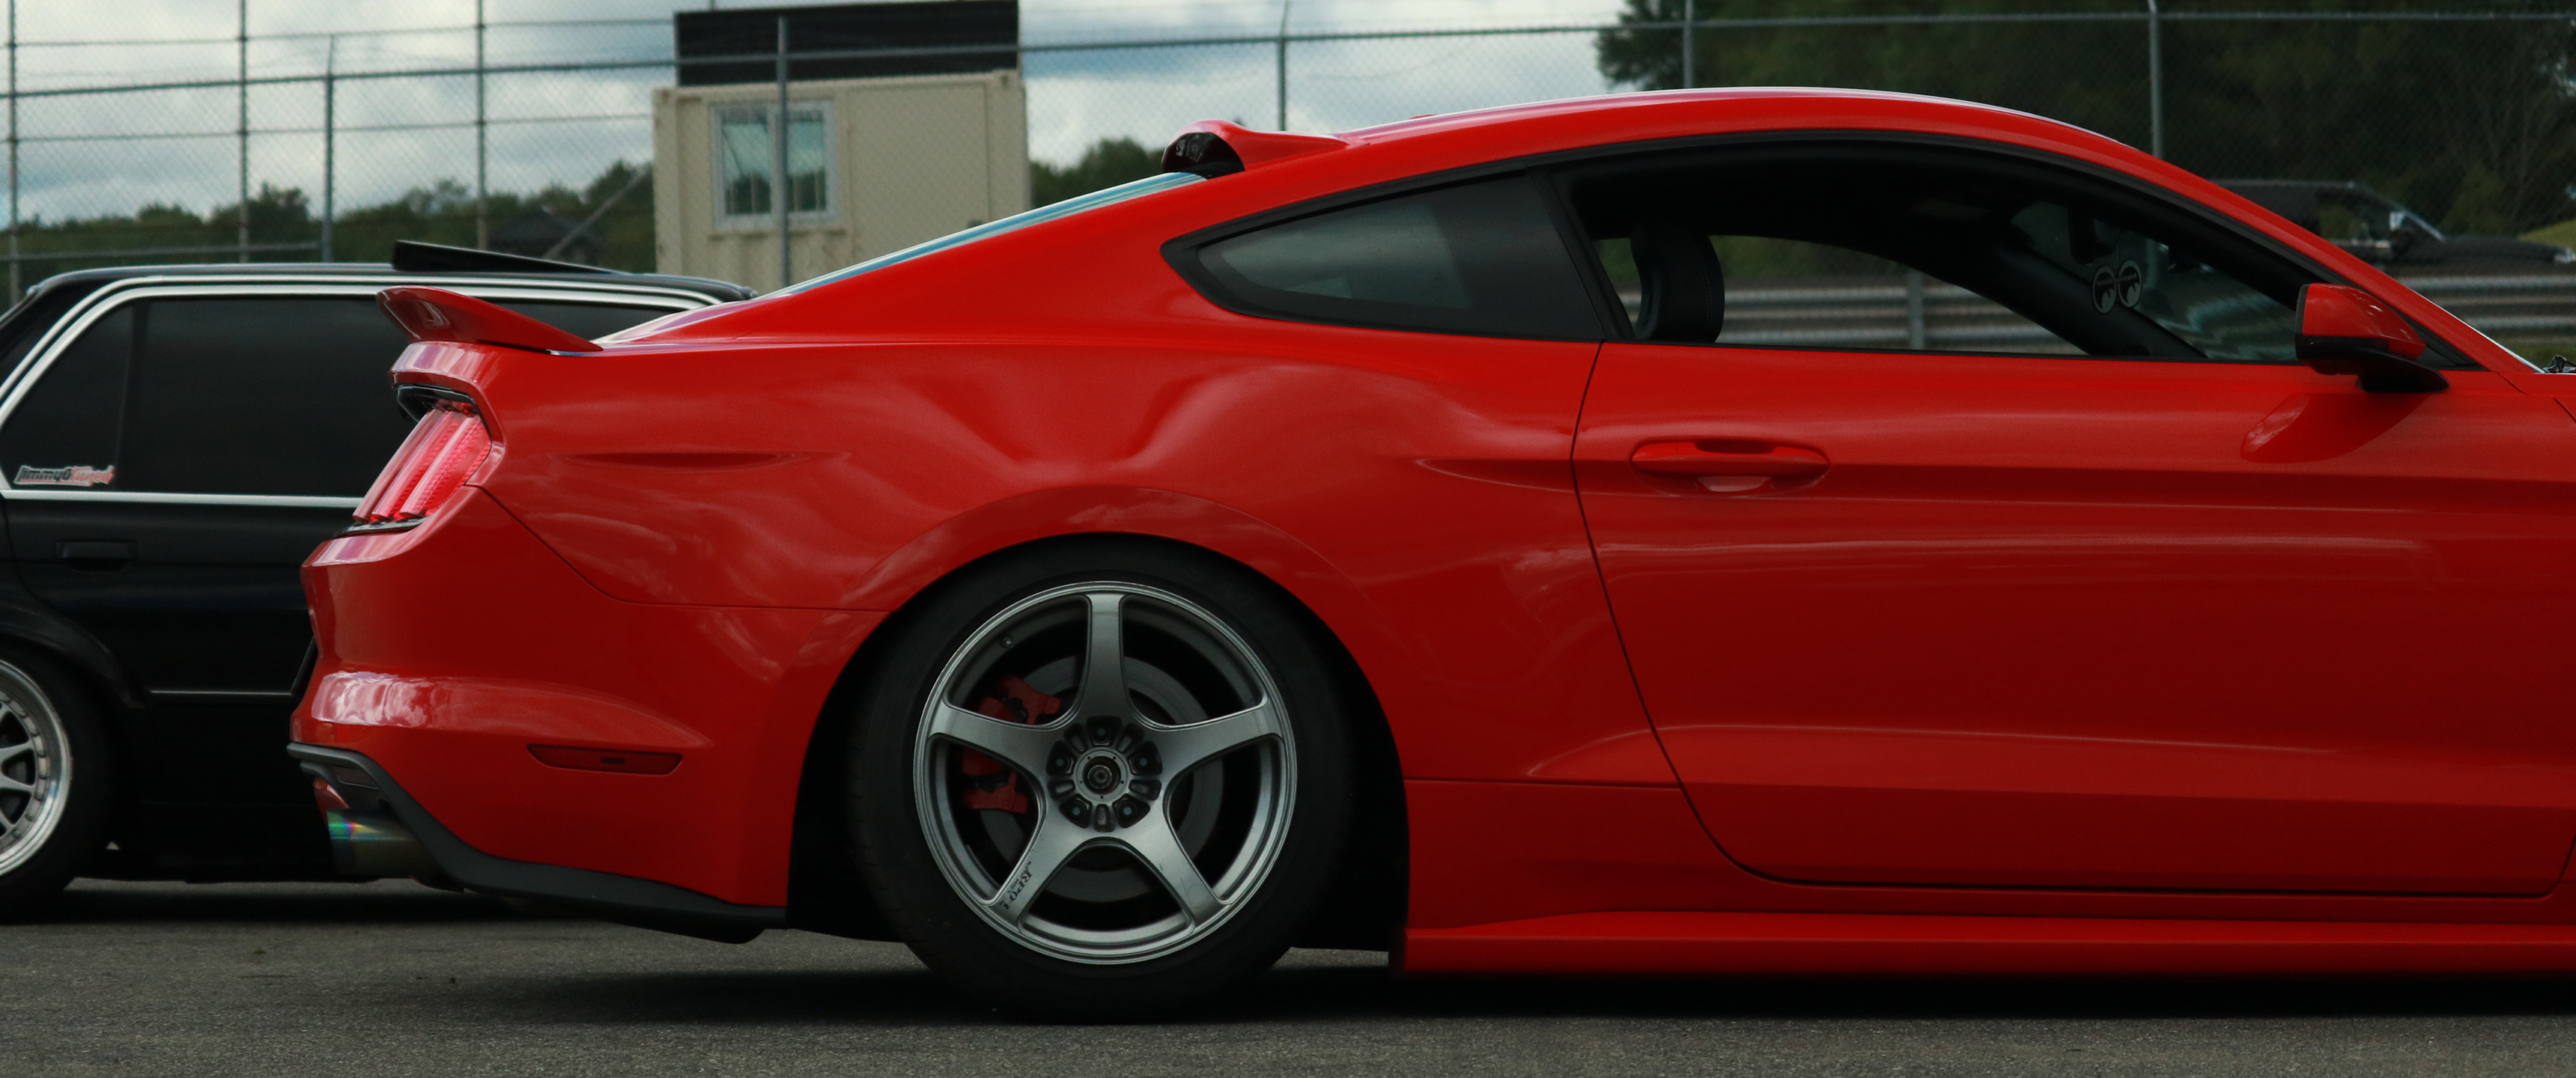 General 3440x1440 car vehicle red cars Ford Ford Mustang muscle cars American cars stanced